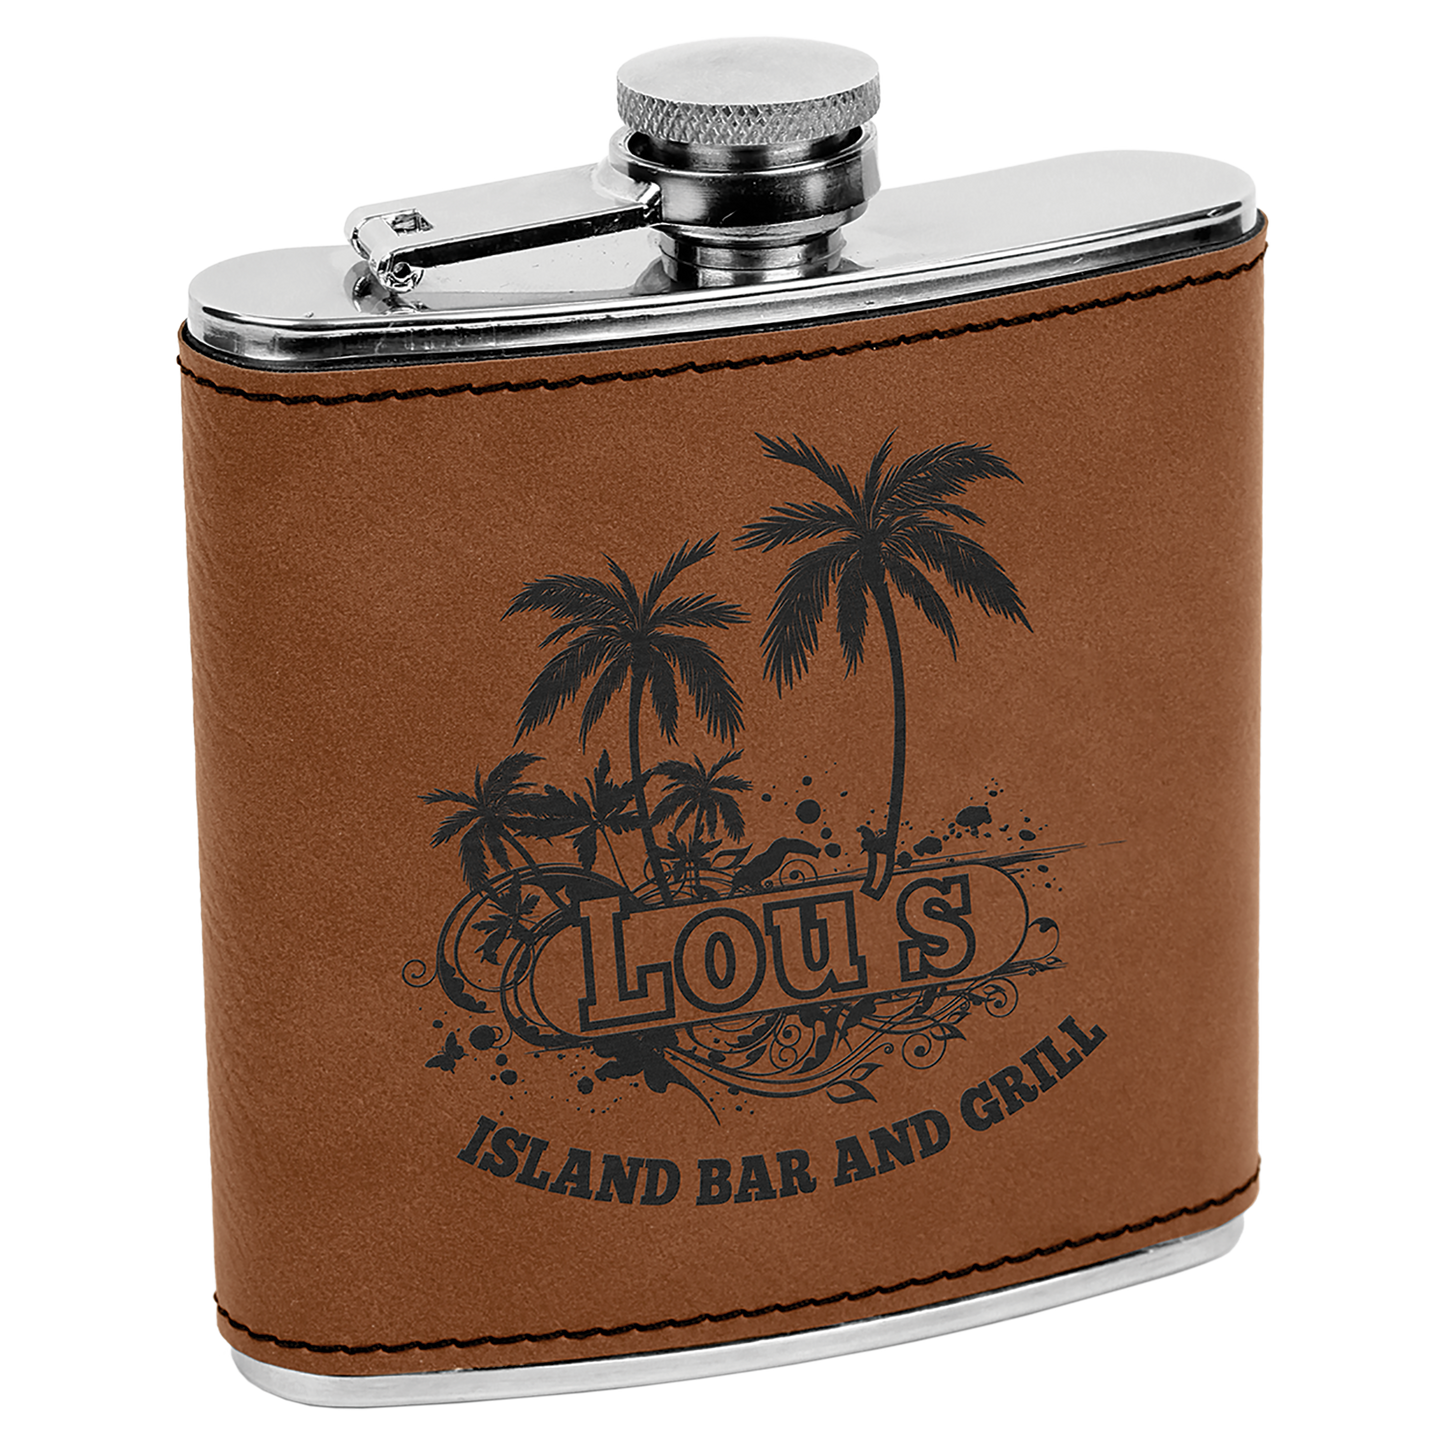 Personalized Leather Flask